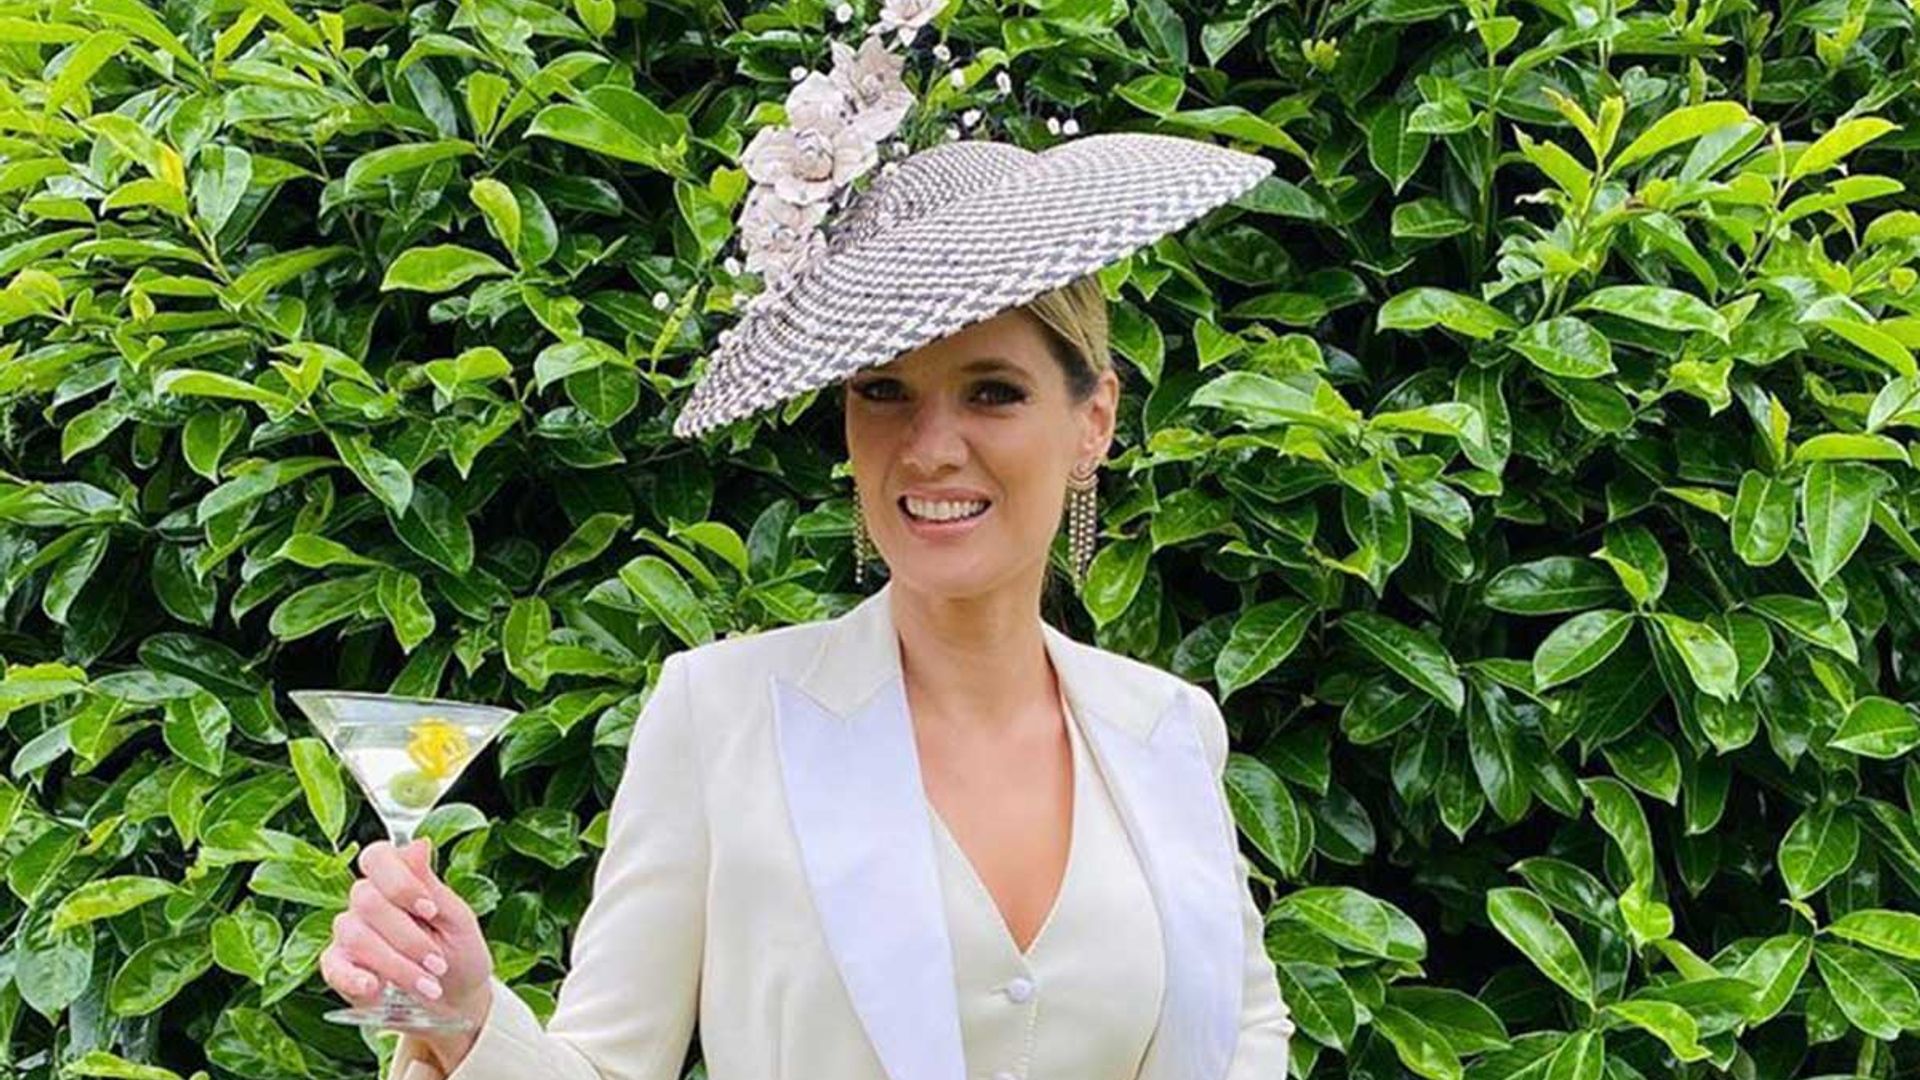 Charlotte Hawkins shocks fans with her very surprising Royal Ascot outfit